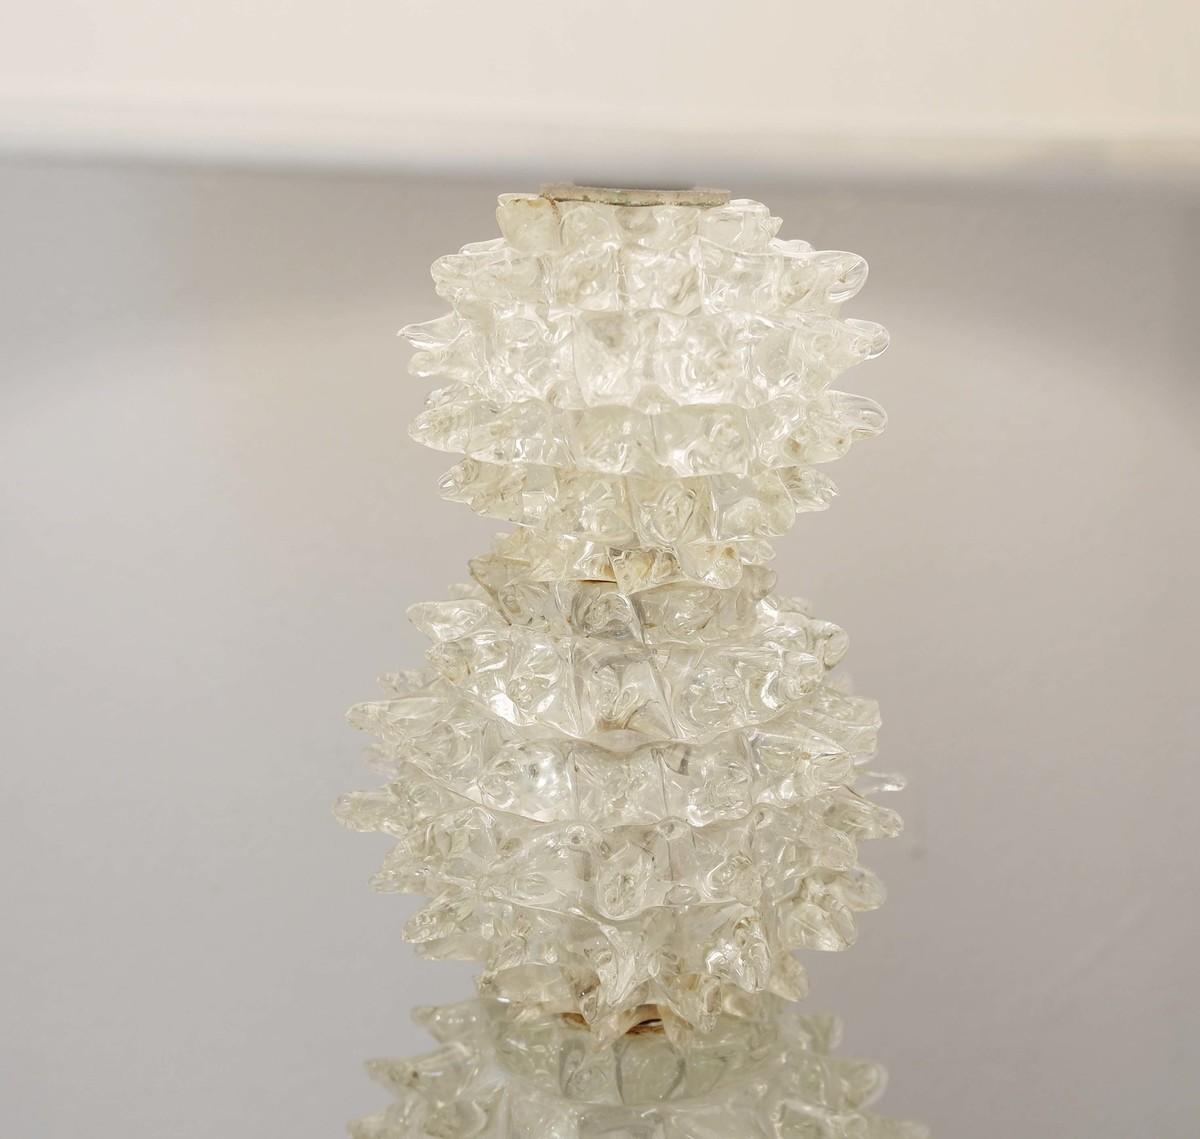 Italian Rostrato Glass Table Lamp from Barovier & Toso, 1940s